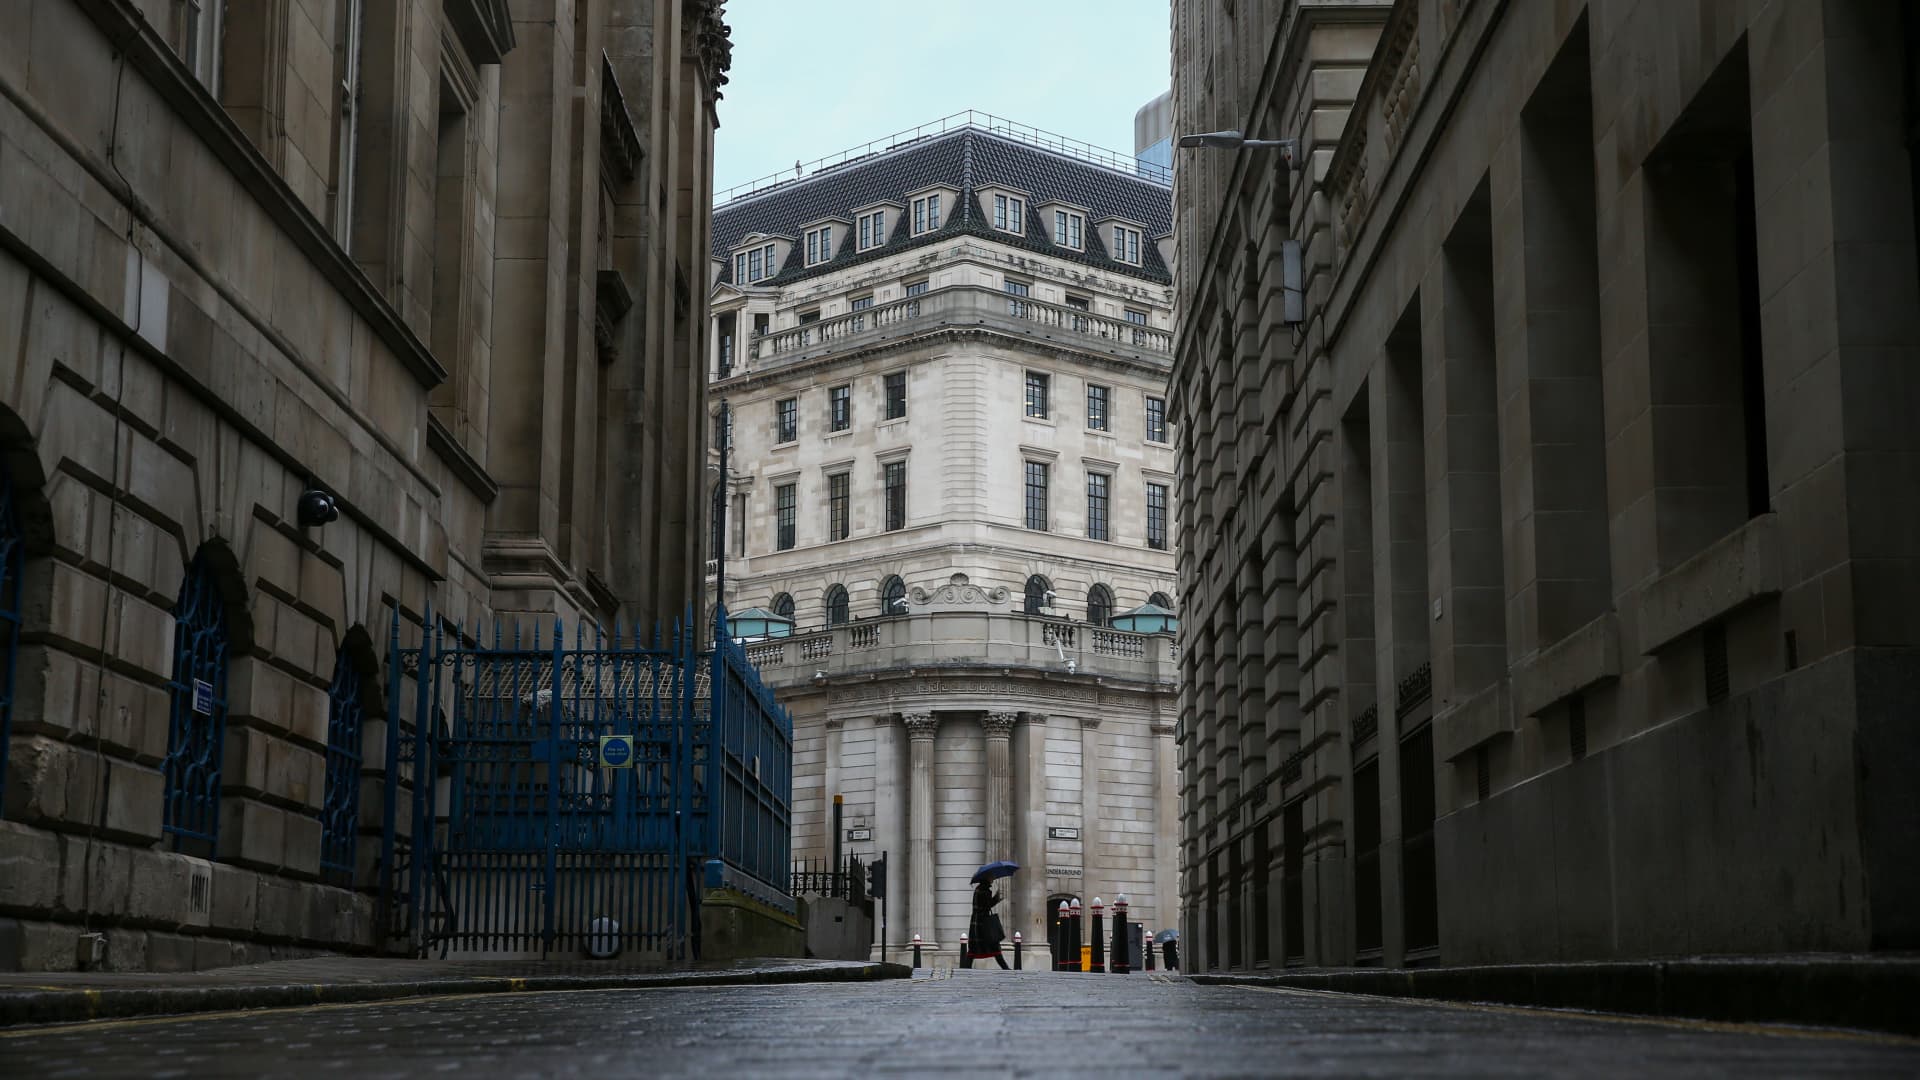 Bank of England raises its benchmark rate by 75 basis points, its biggest hike in 33 years